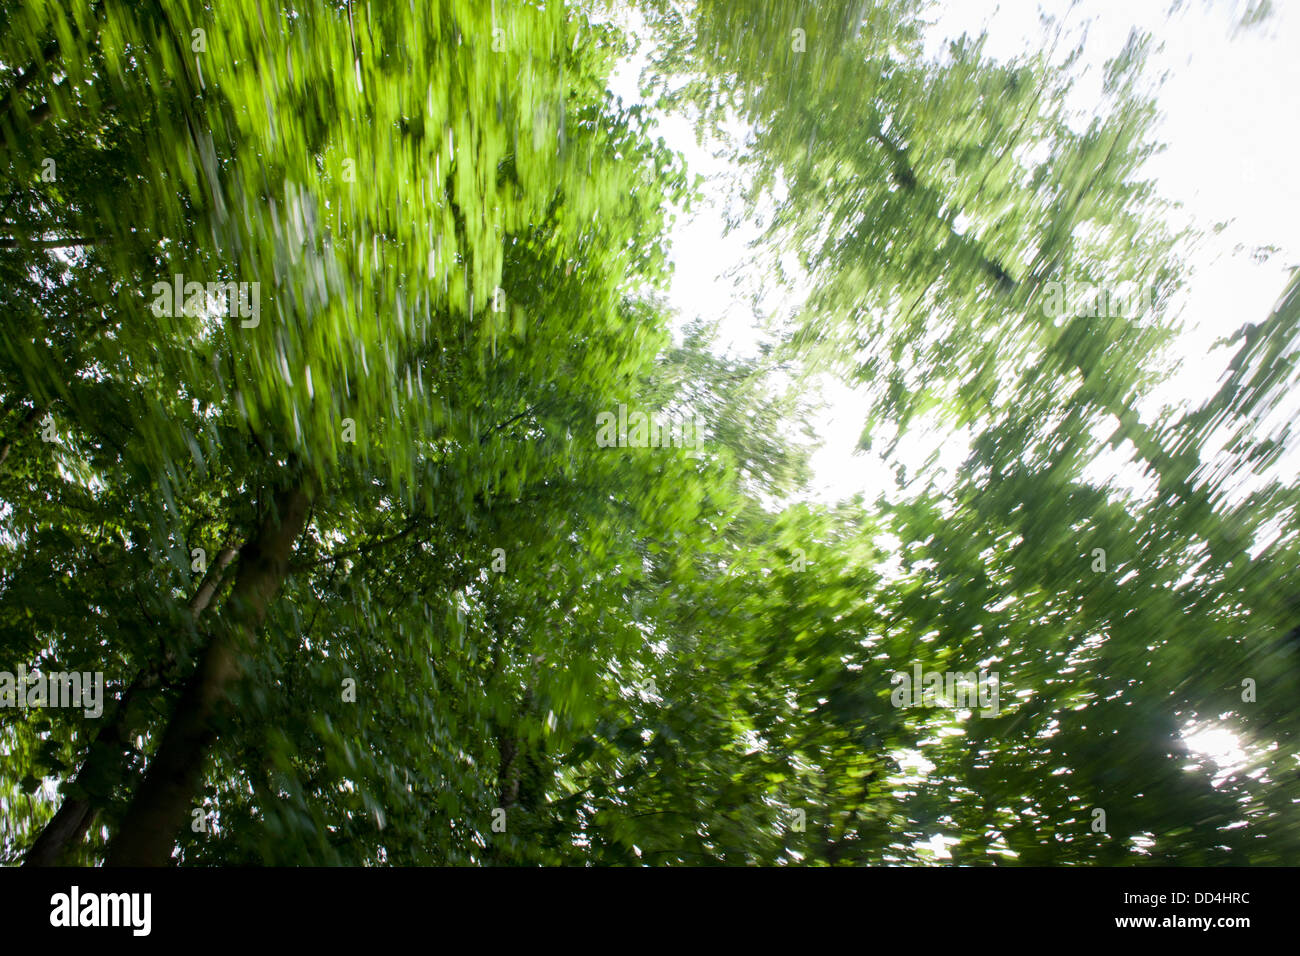 Blurred vegetation of beech trees during a daydream moment in a Somerset forest. Stock Photo